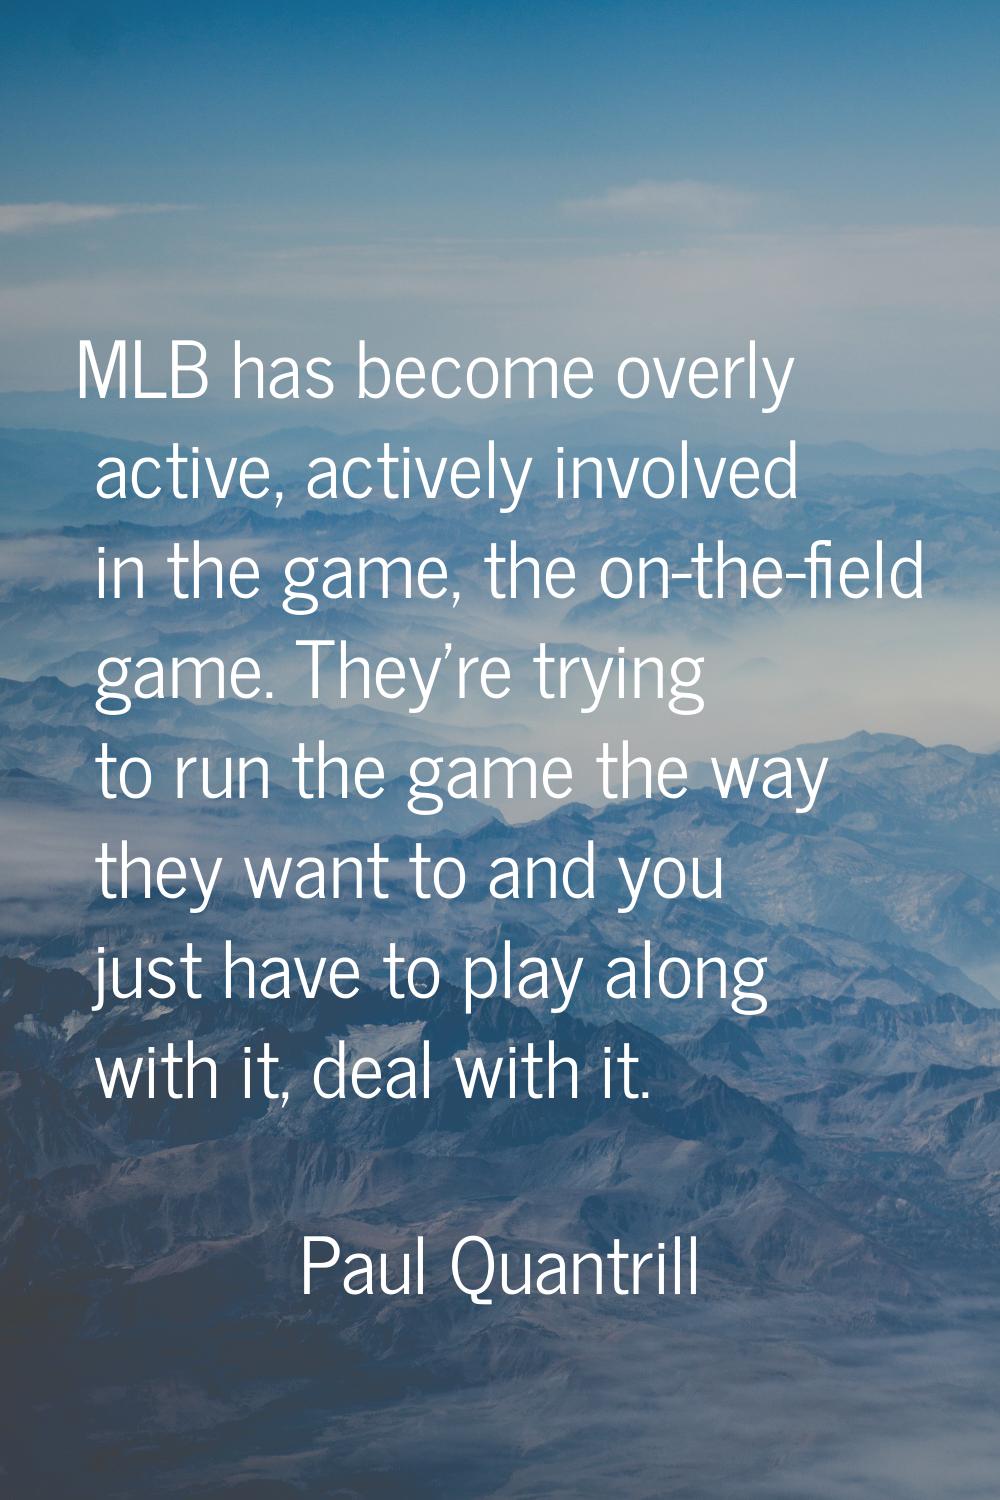 MLB has become overly active, actively involved in the game, the on-the-field game. They're trying 